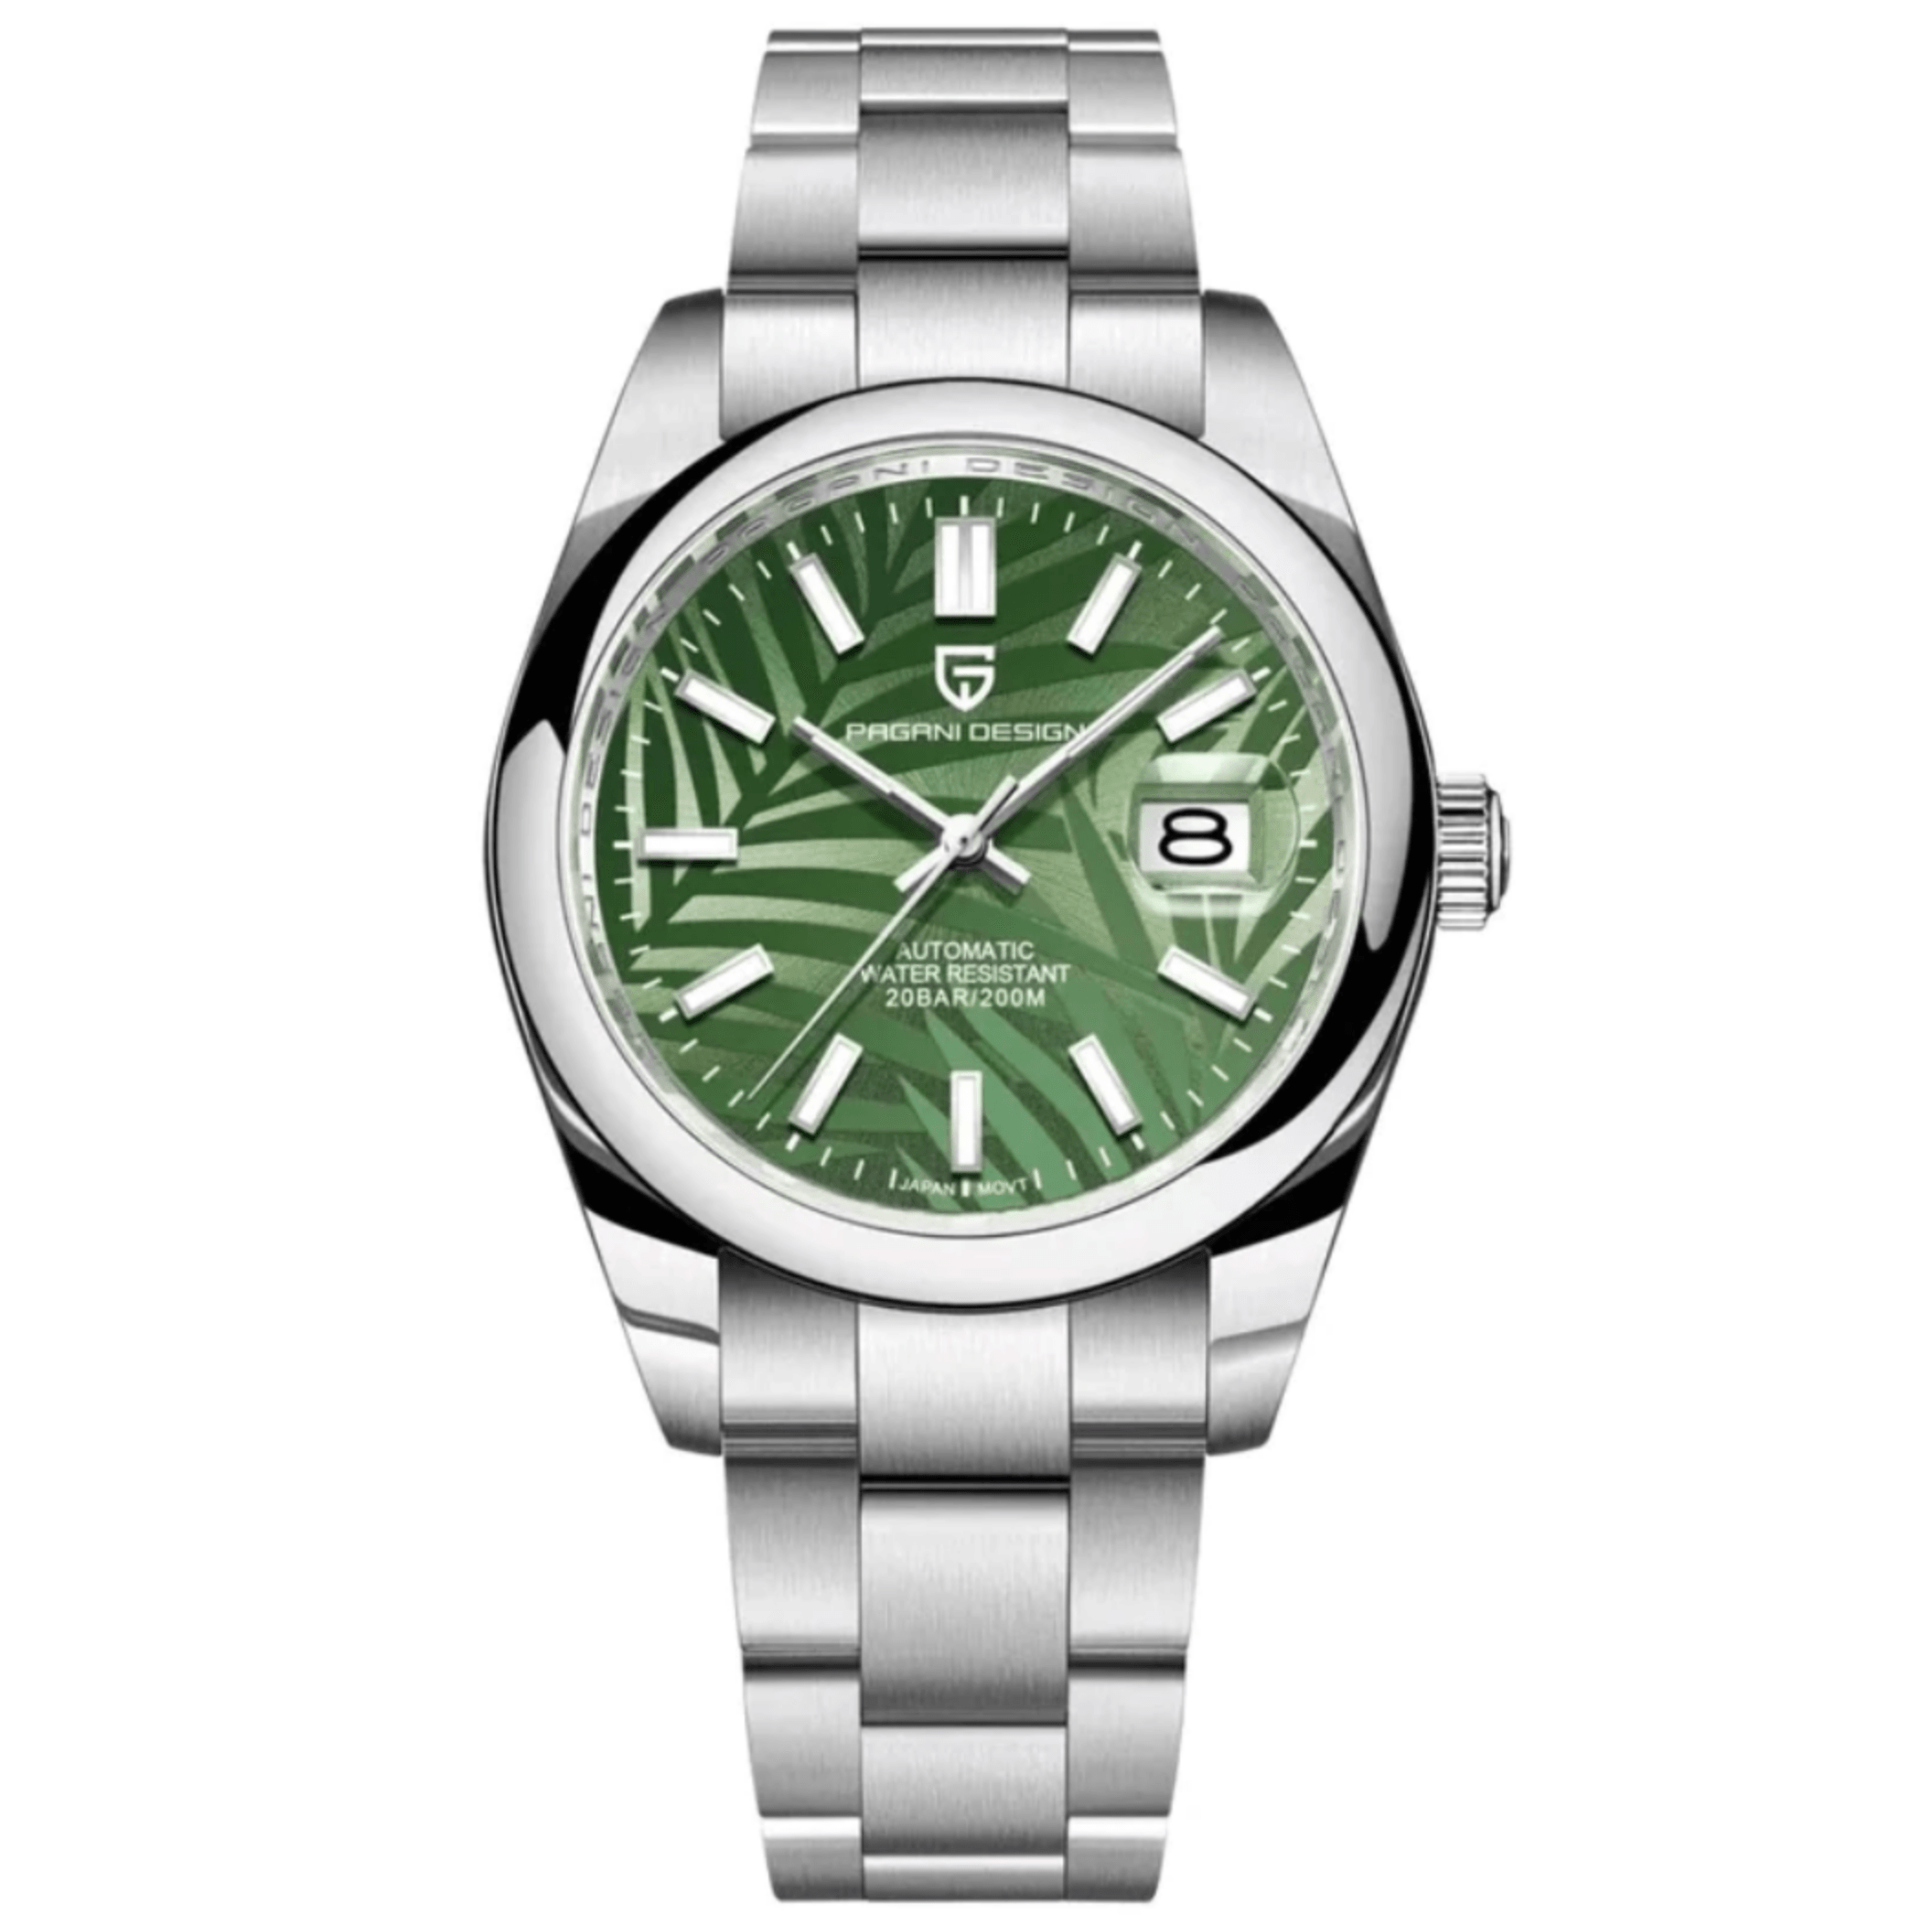 Pagani Design PD-1715 40mm Mens Automatic Waterproof Mechanical Watch with (Japanese NH-35 Movement) Palm Green Motif - DREAM WATCHES